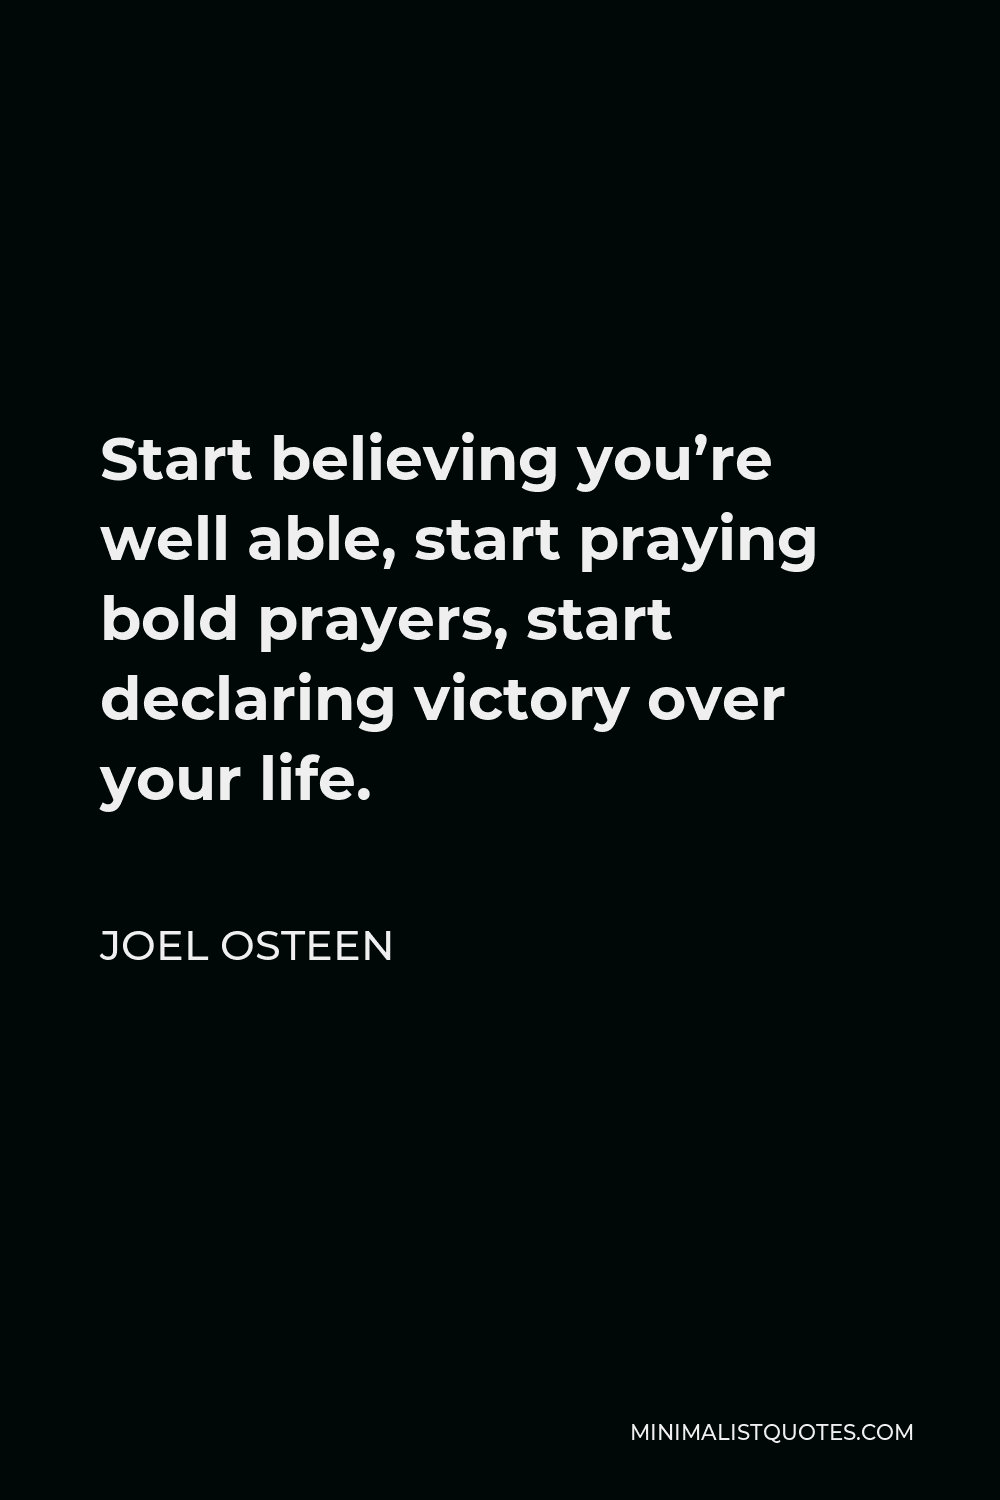 Joel Osteen Quote - Start believing you’re well able, start praying bold prayers, start declaring victory over your life.